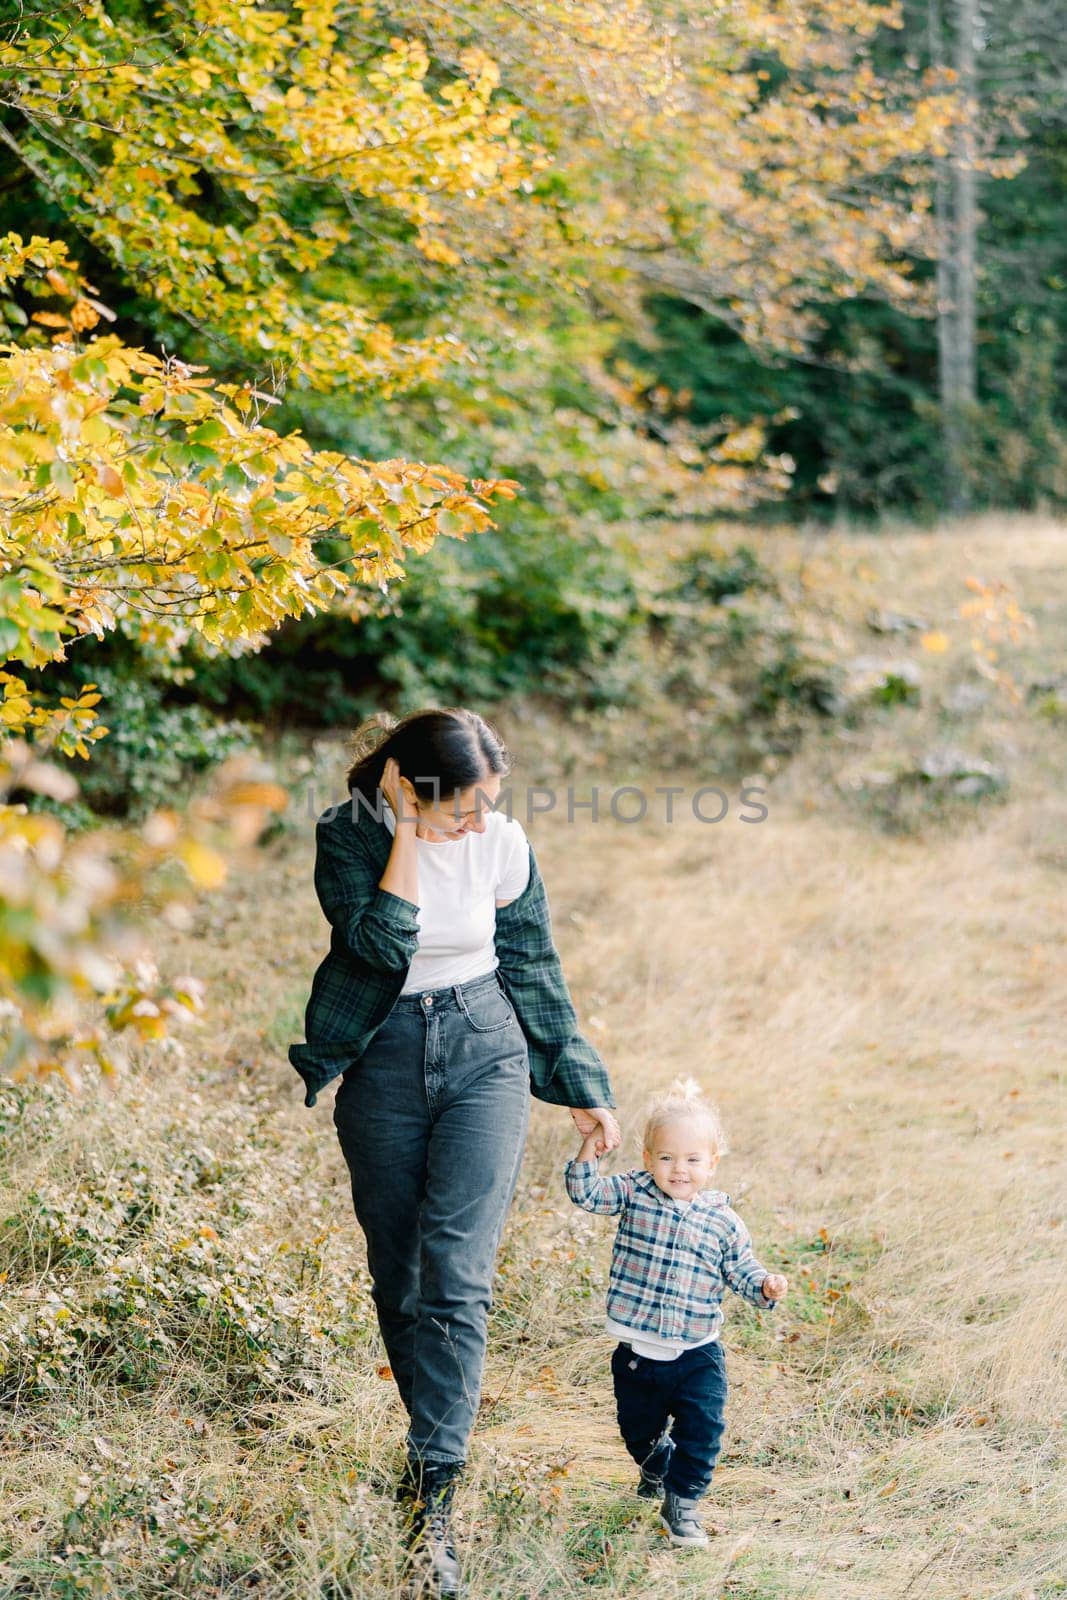 Mom leads a little girl by the hand, straightening her hair, walking through the autumn forest. High quality photo